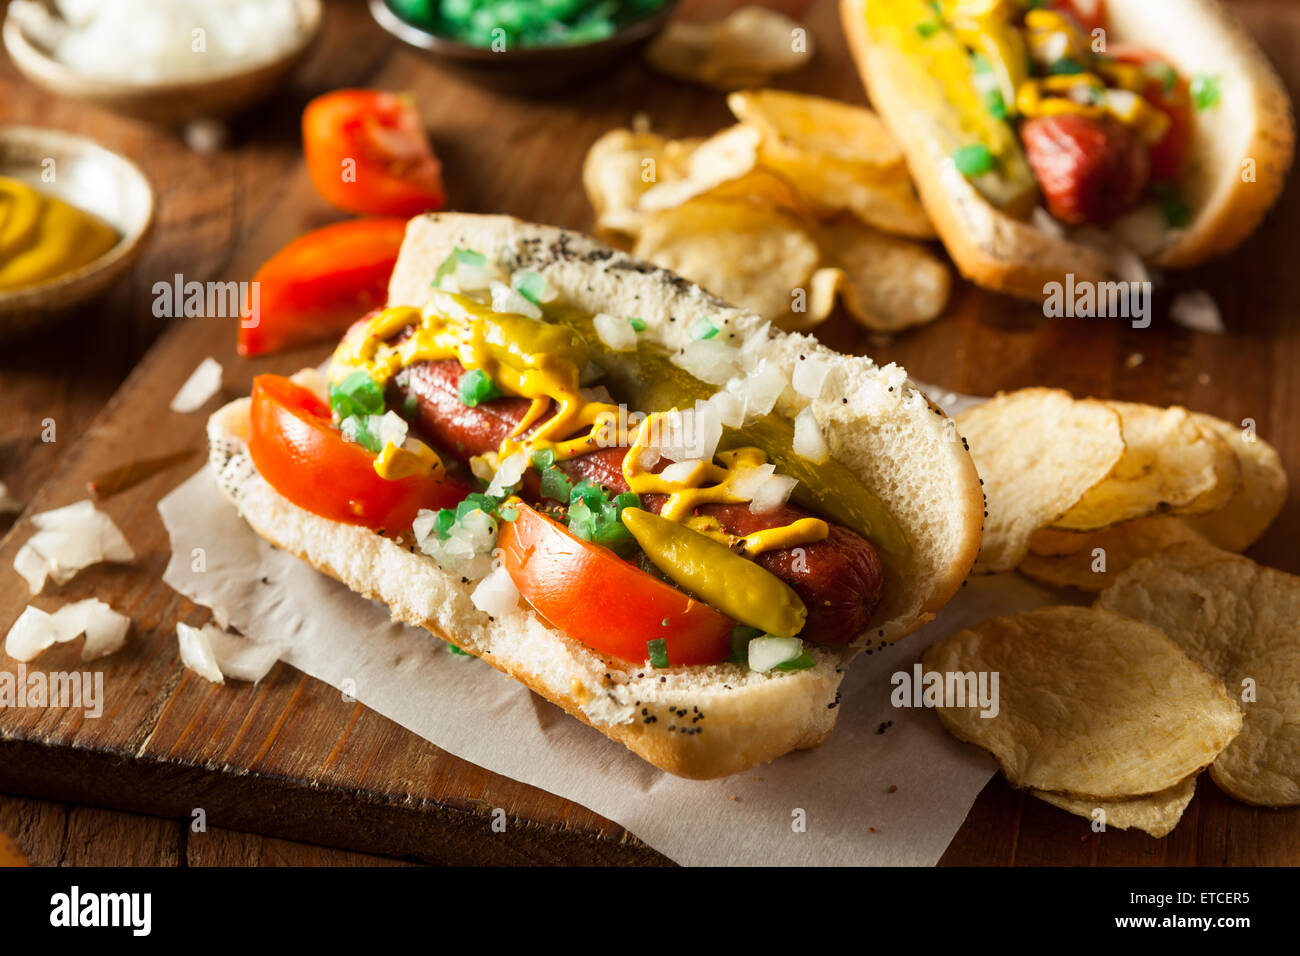 Homemade Chicago Style Hot Dog with Mustard Relish Tomato and Onion Stock Photo